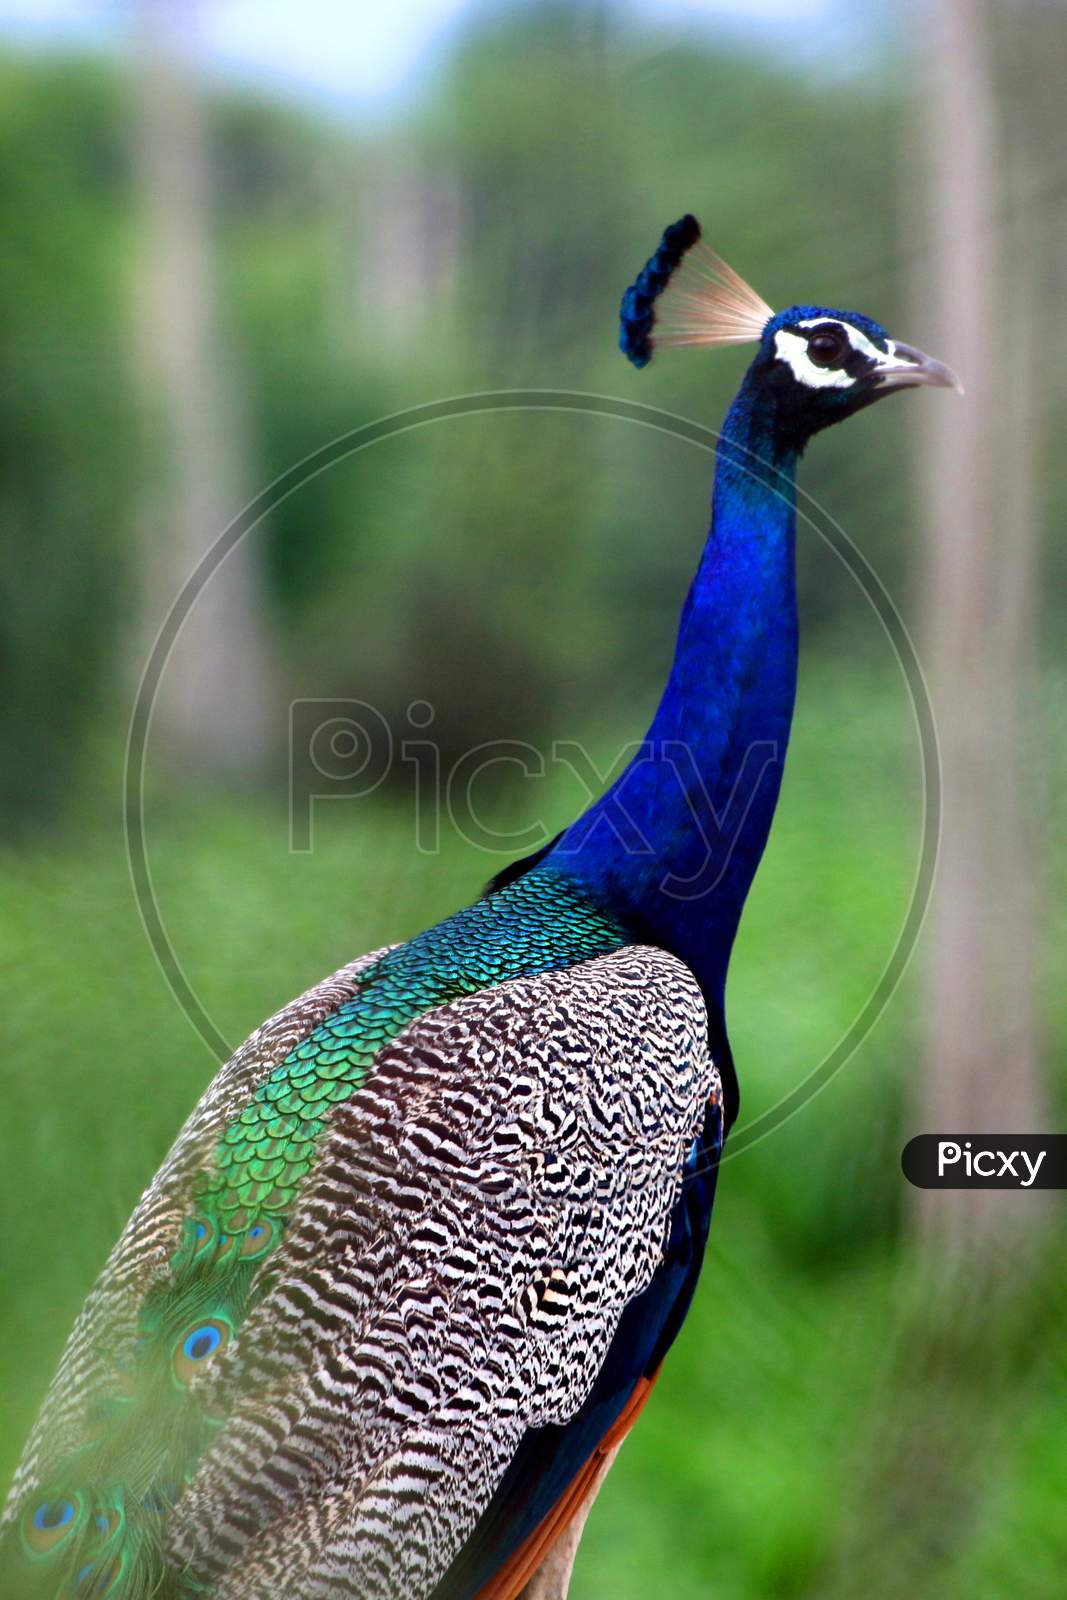 Peacock, the national bird of India are seen on the forest roads in Ajmer on August 23, 2020.